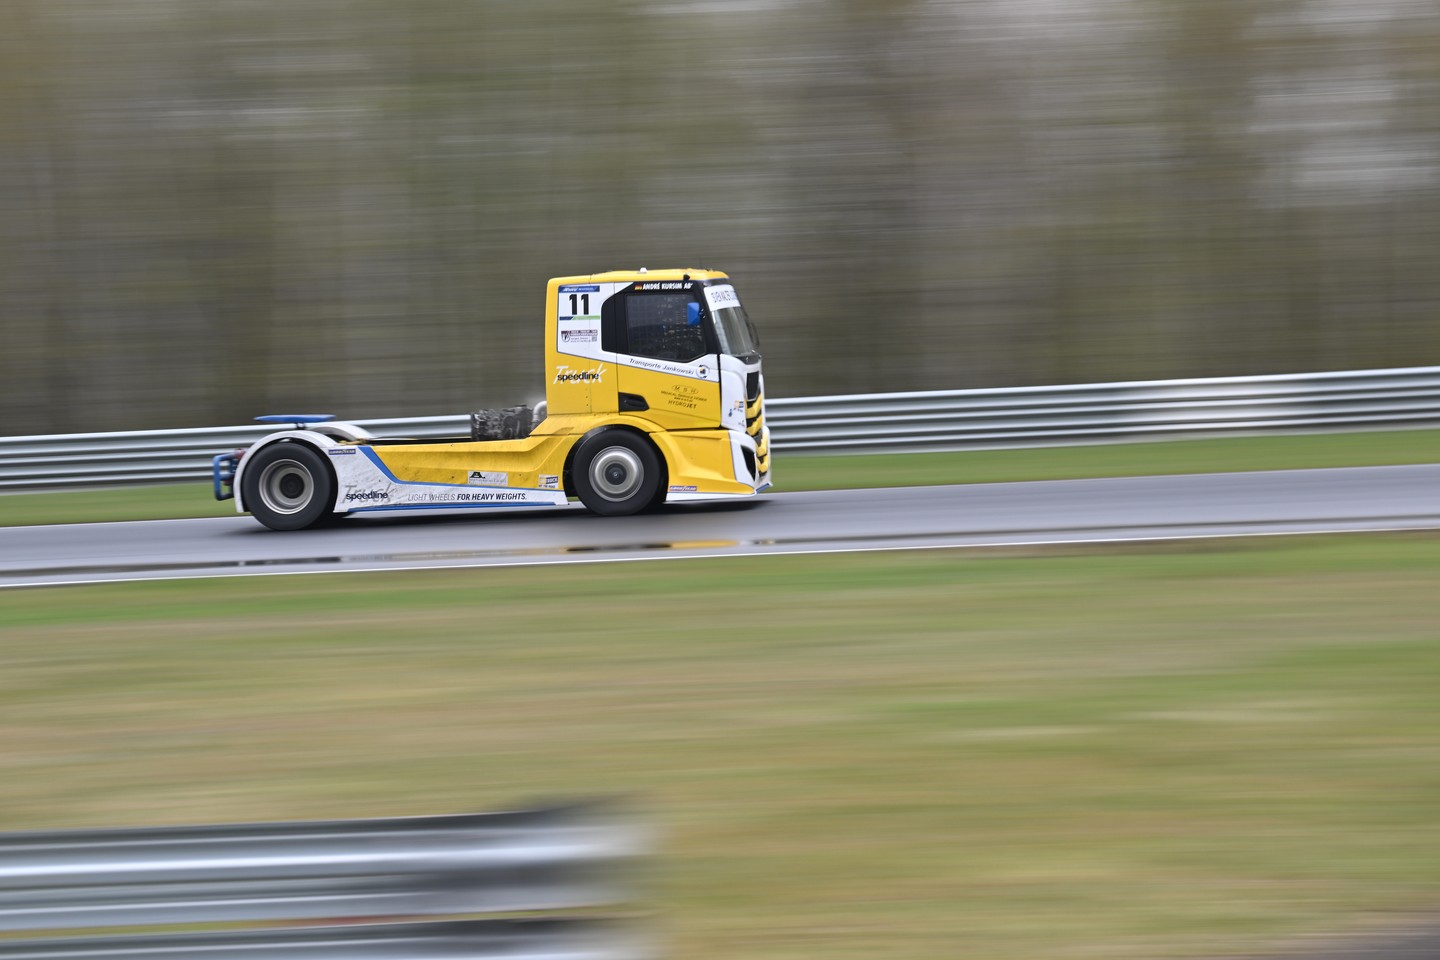 I am no a big fan of #cars and #trucks, but it was great to test #NikonZ9 in action! AF systems are really amazing... #Nikon #racing #racecars #noedit #czechrepublic #most